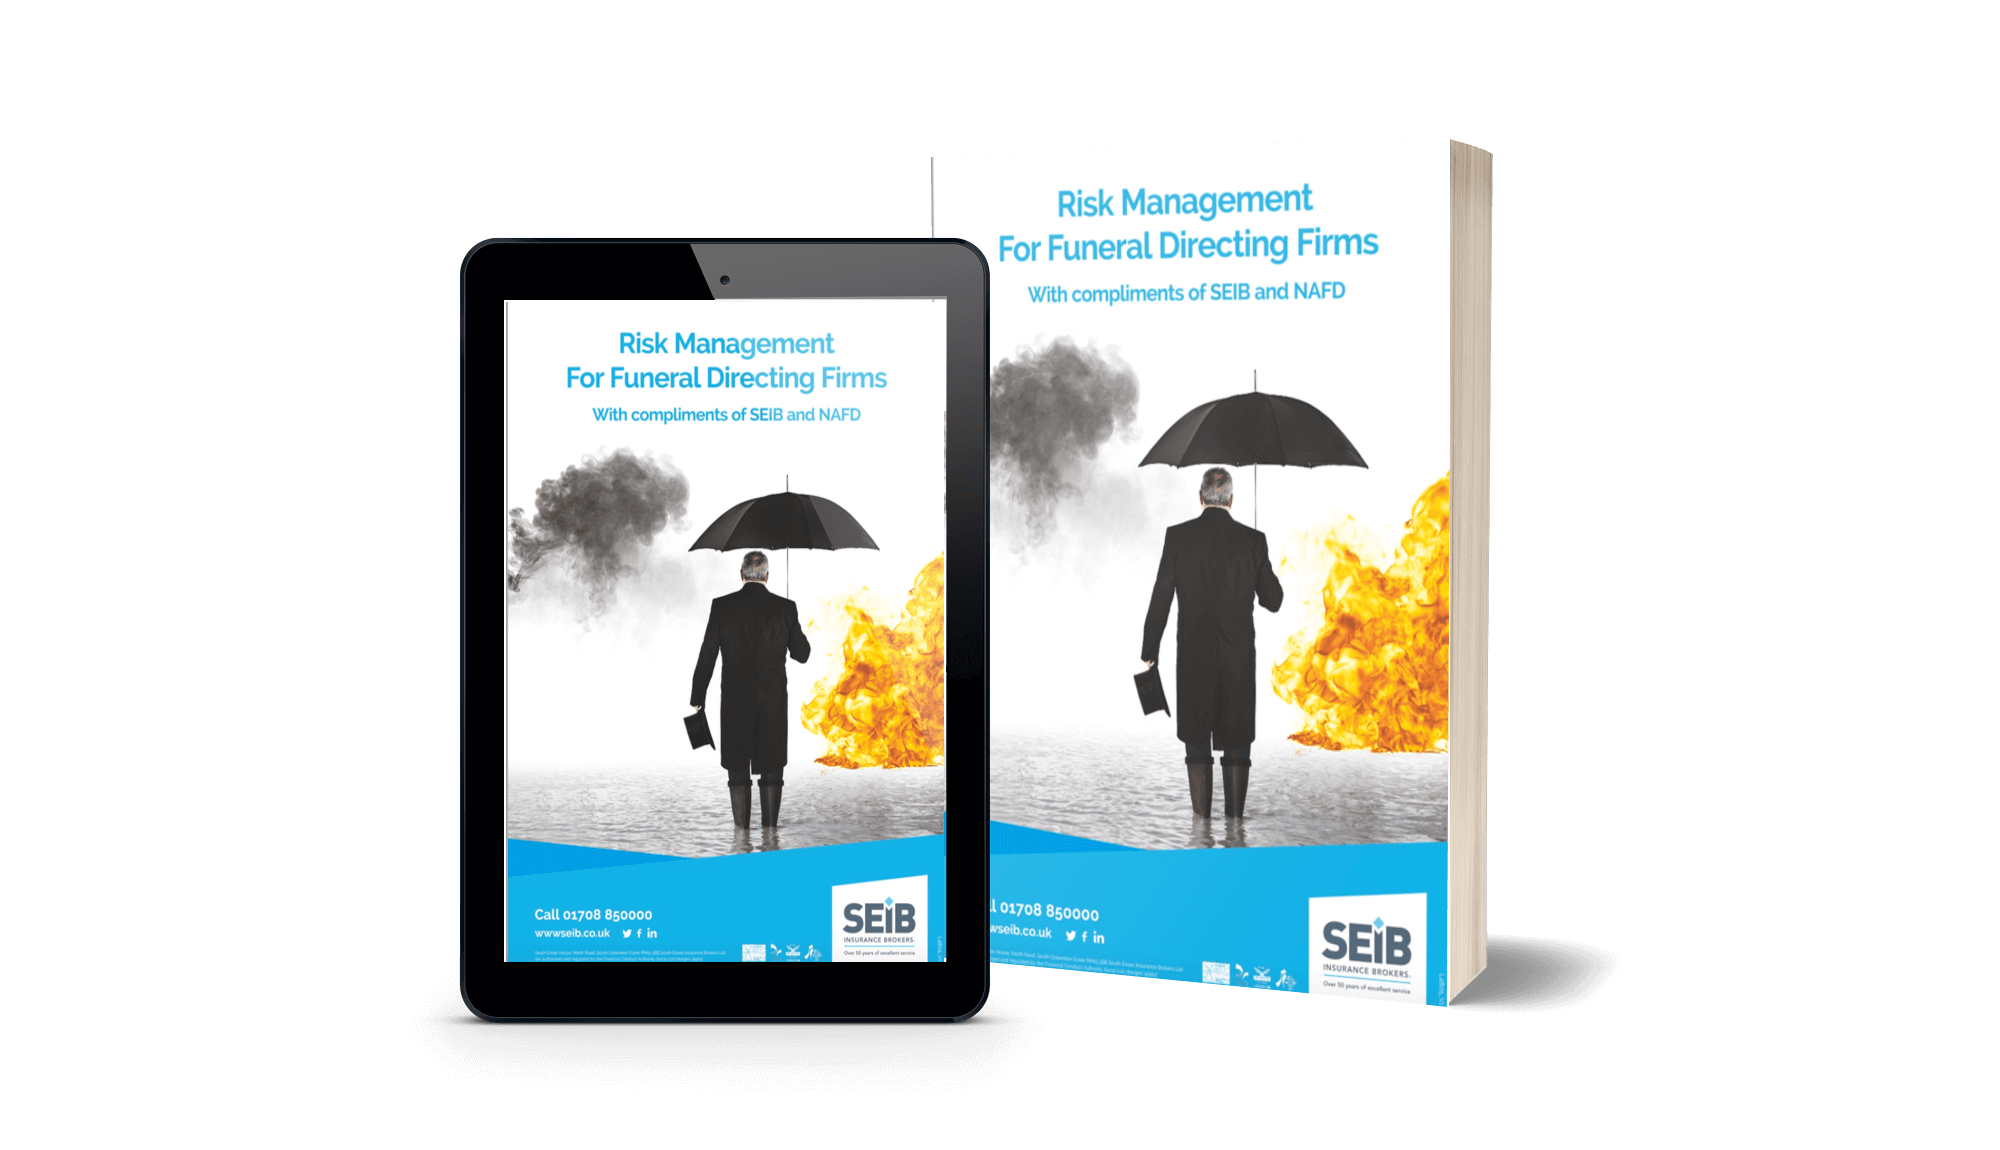 Funeral Director risk management guide cover image